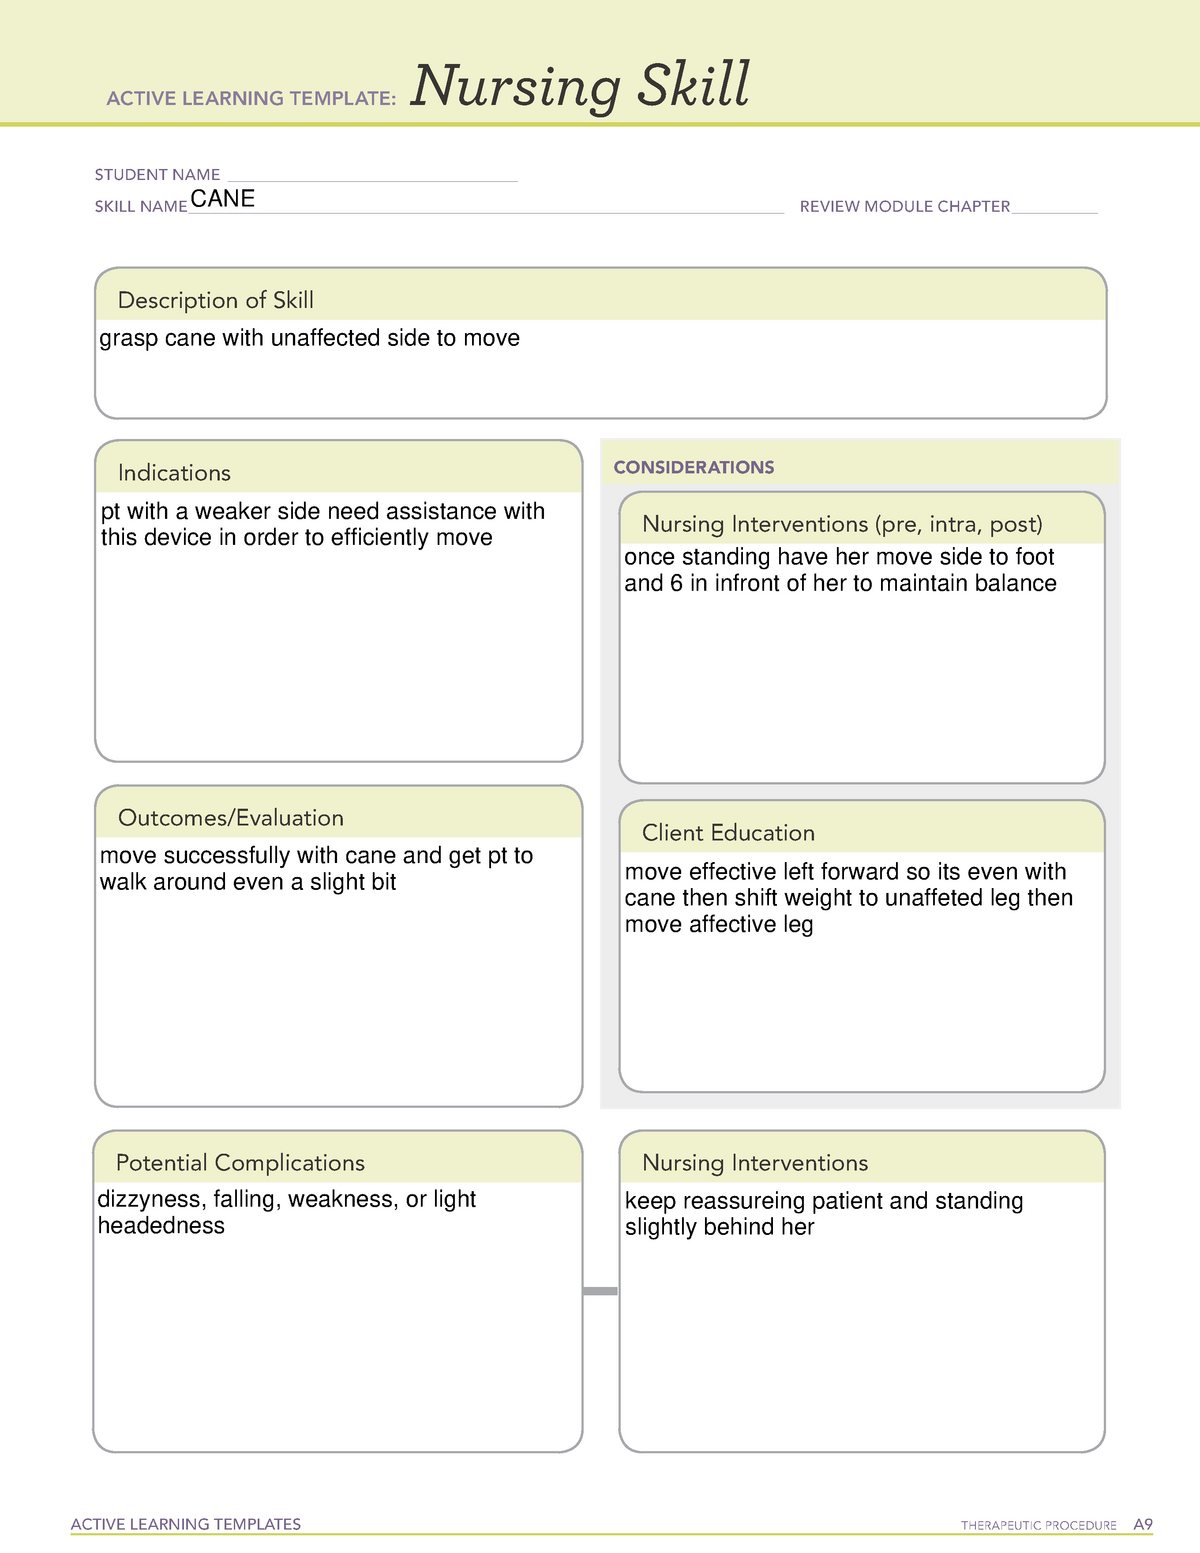 Active Learning Template Nursing Skill form (3)CANE - ACTIVE LEARNING ...